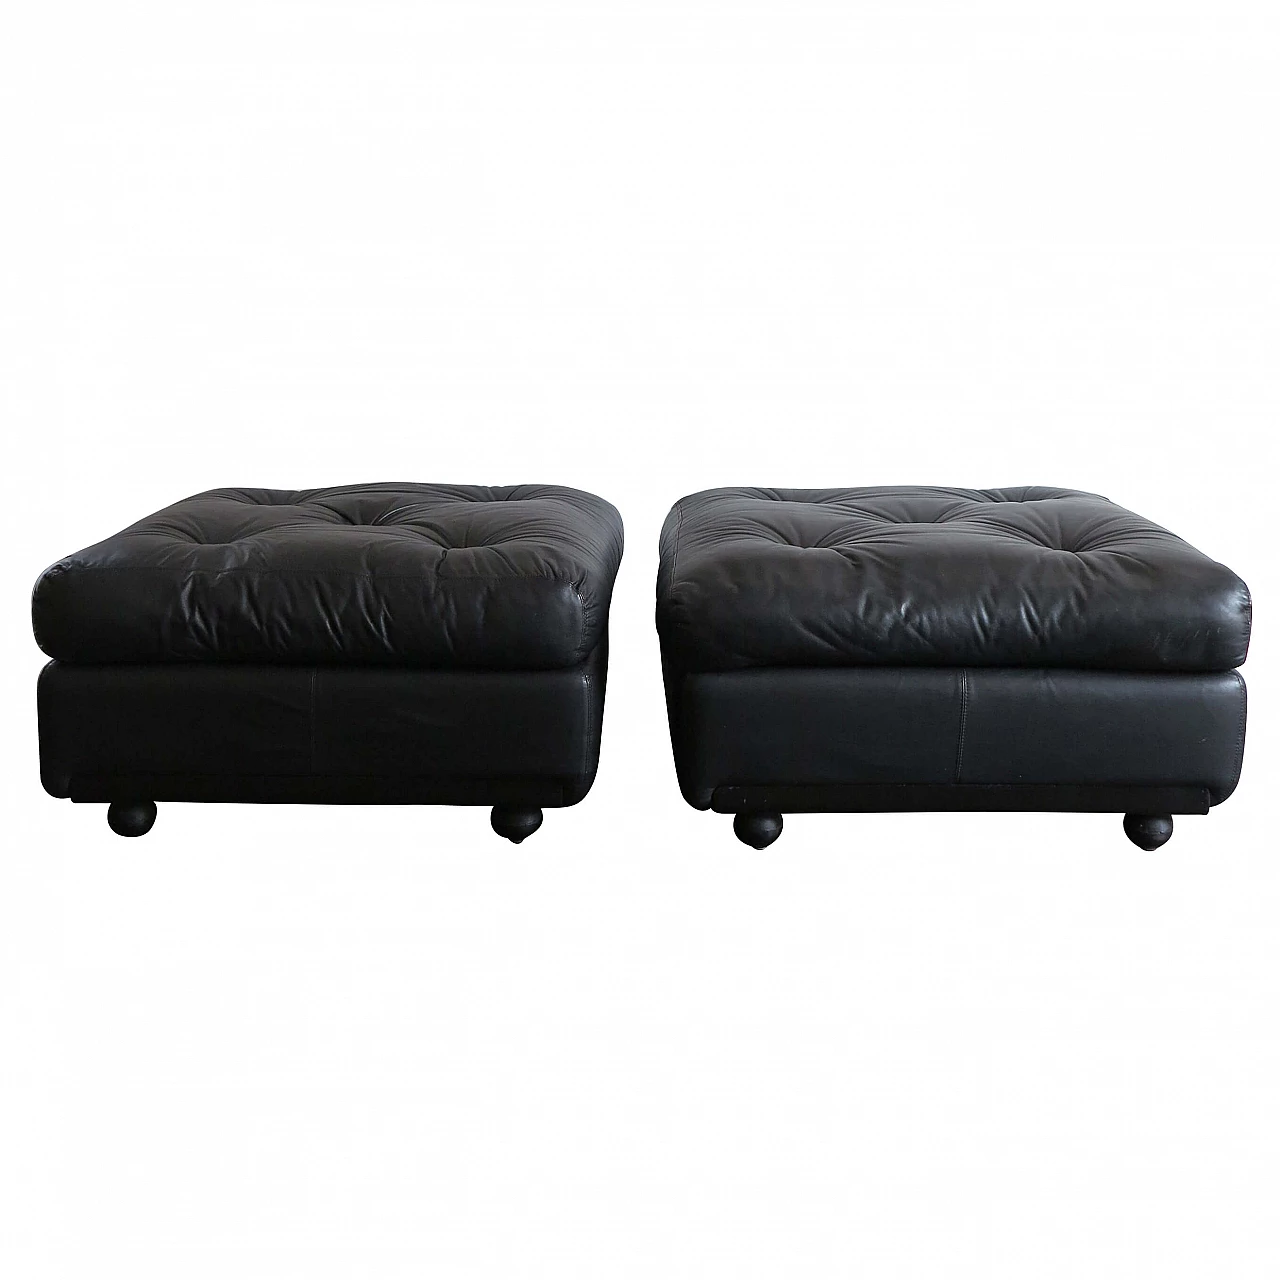 Pair of Amanta poufs by Mario Bellini for B&B, 1970s 1305448